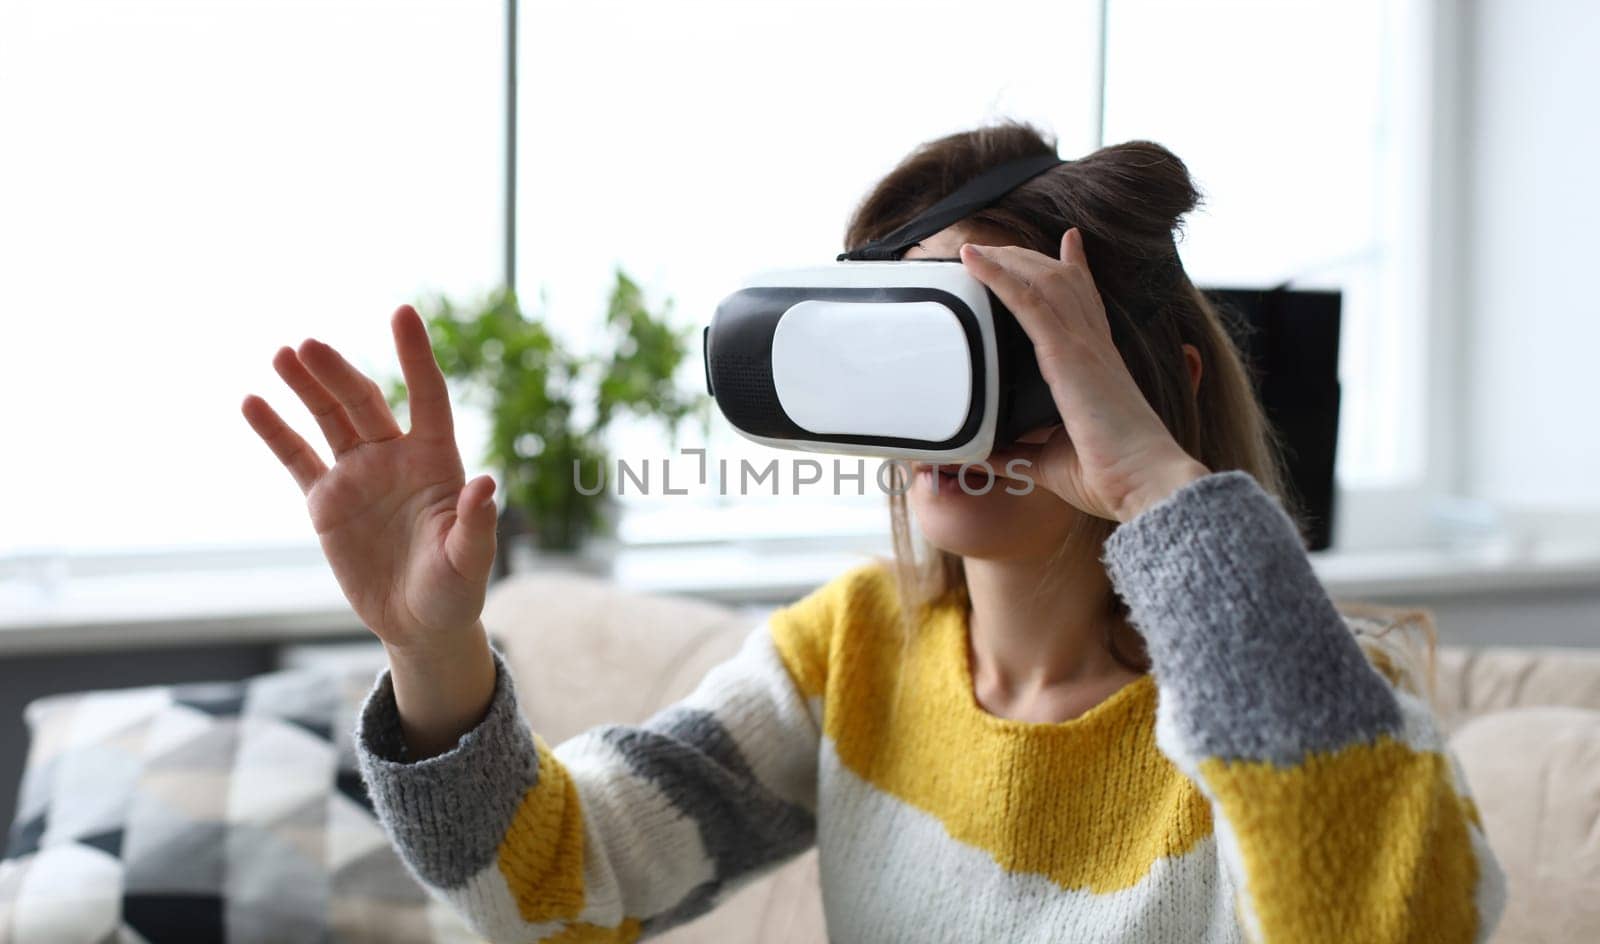 Girl sitting home looking through virtual glasses. Virtual reality simulates exposure and response to exposure, gaming. Young woman on sofa experiencing peace and positive emotions